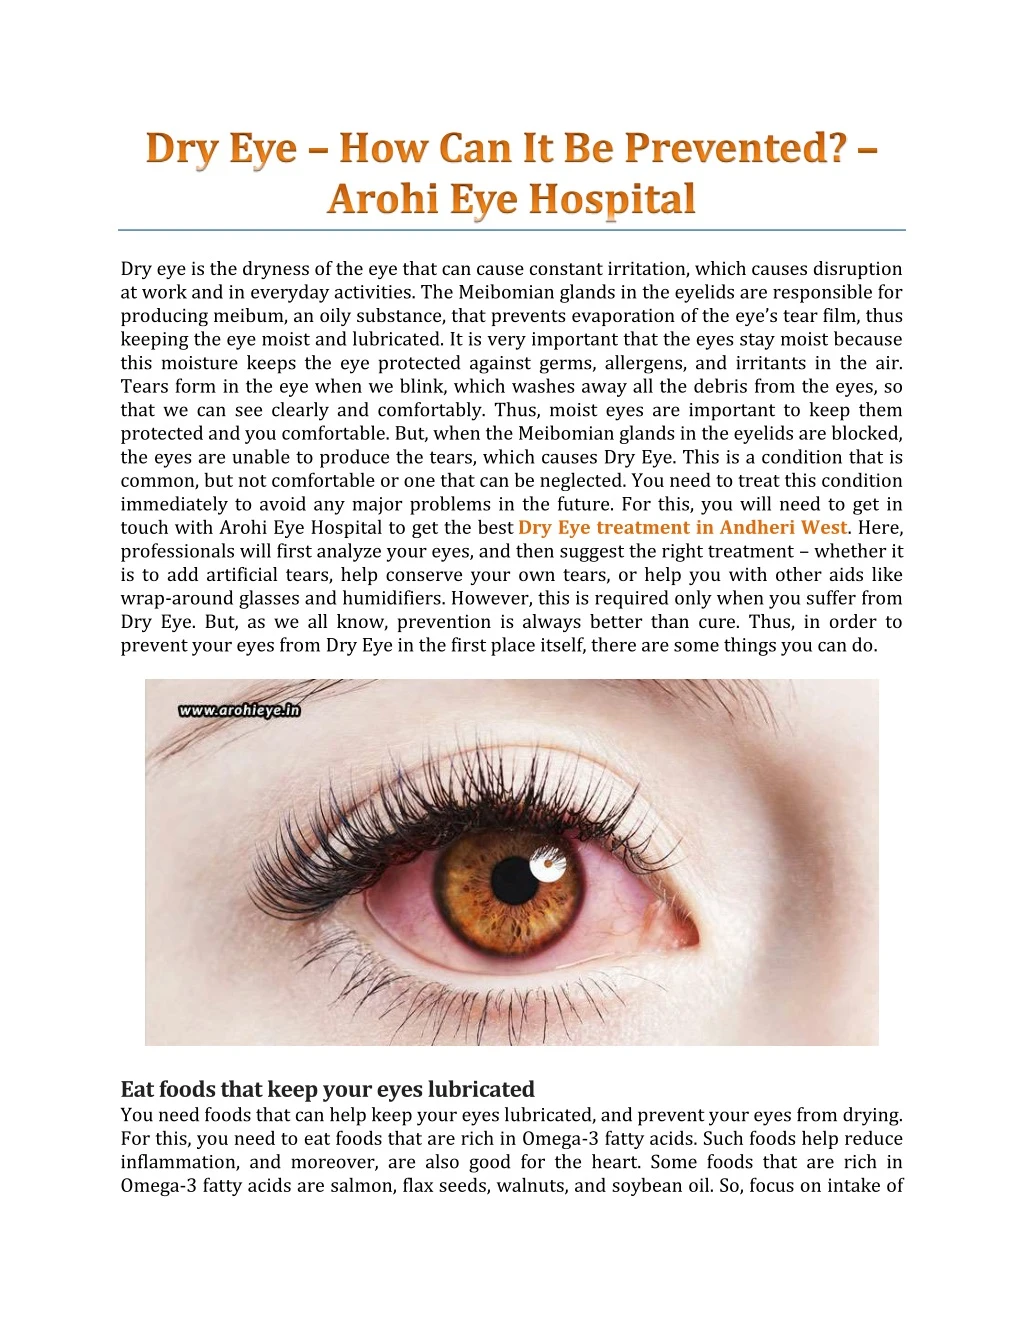 dry eye is the dryness of the eye that can cause